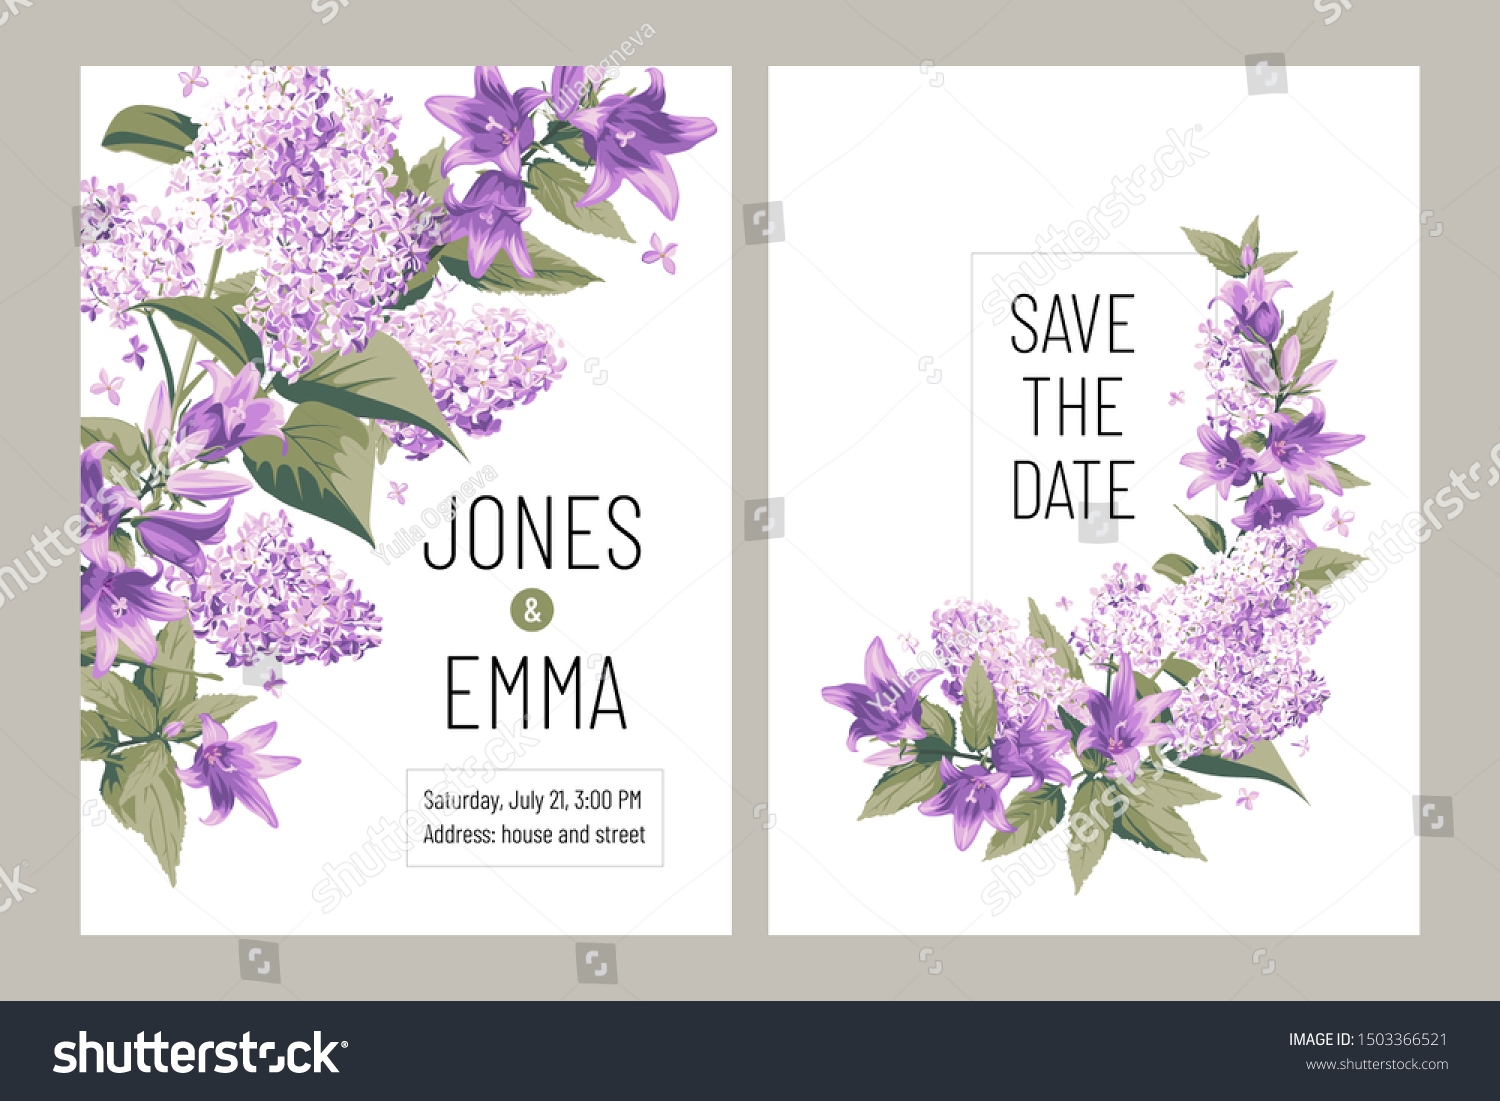 SVG of Wedding invitation card. Frame with text and flowers - purple Campanula and Lilac on white Background. svg